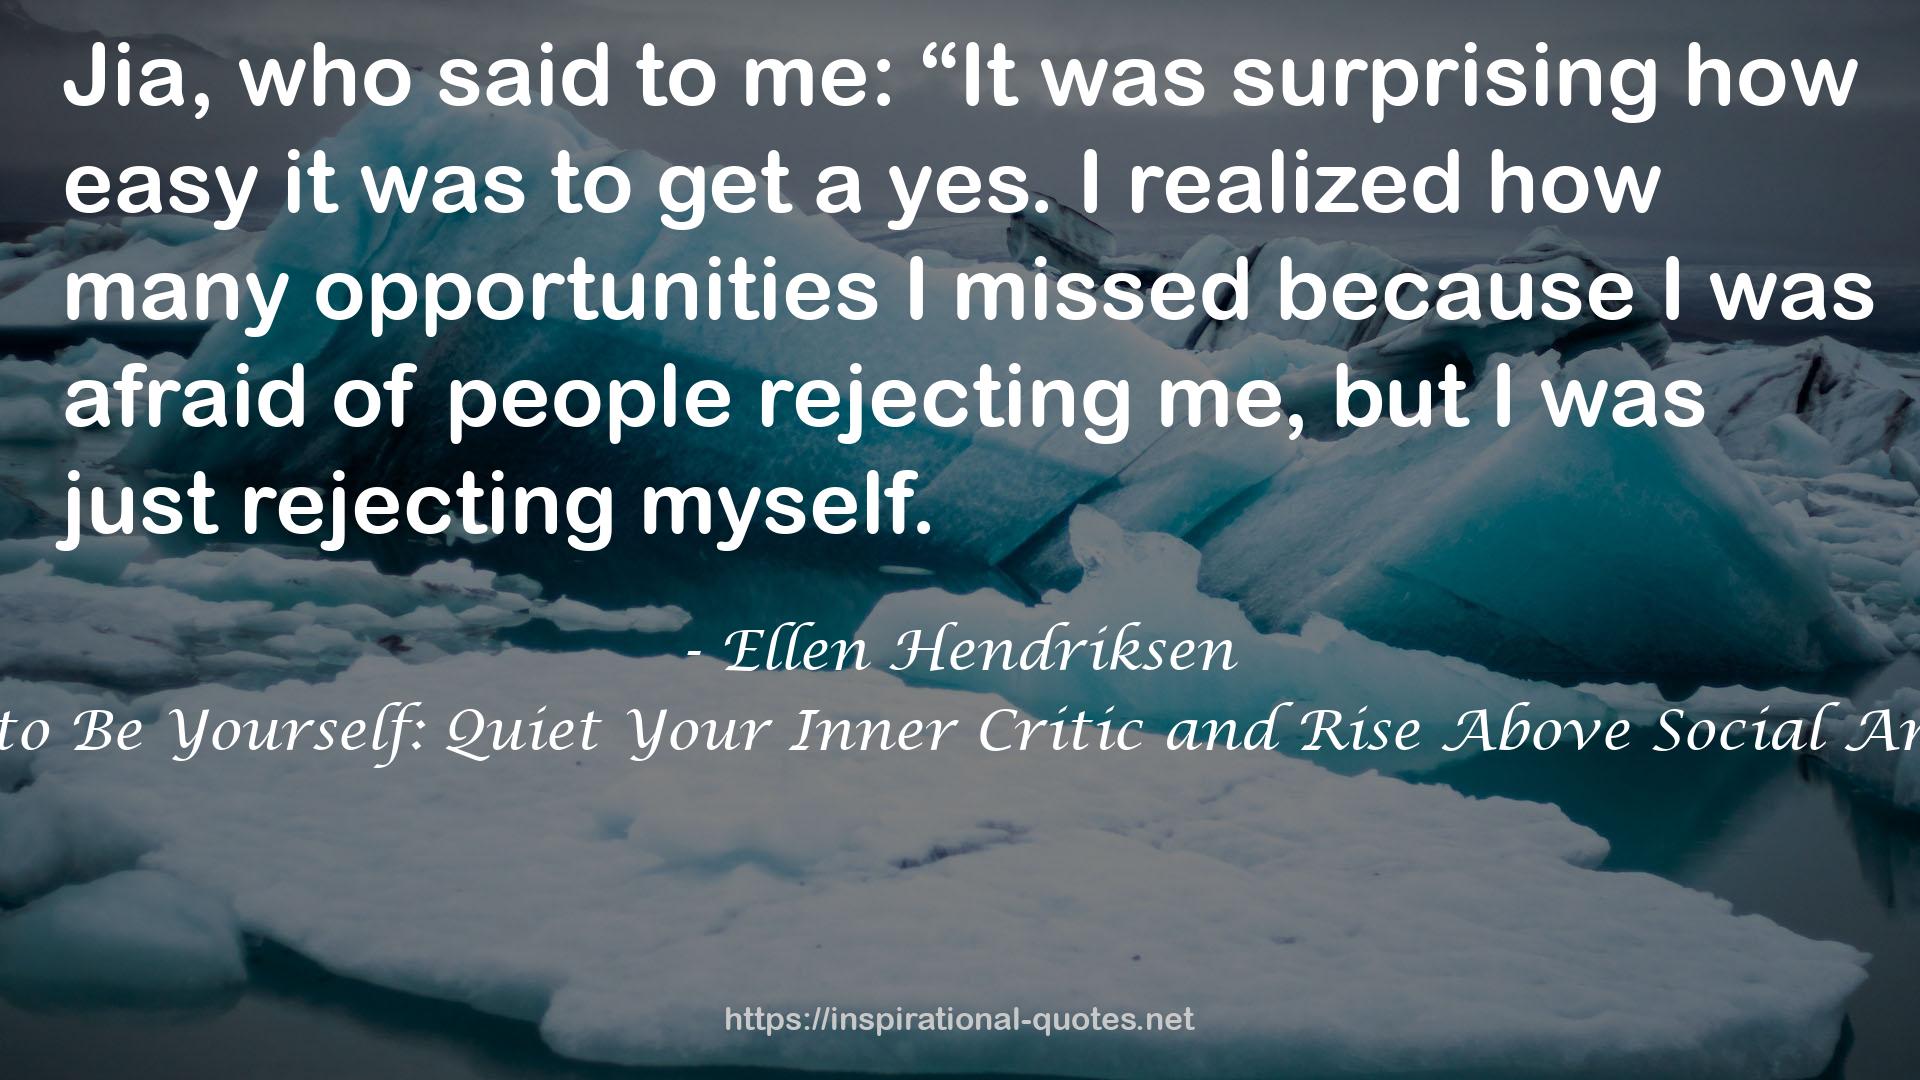 How to Be Yourself: Quiet Your Inner Critic and Rise Above Social Anxiety QUOTES